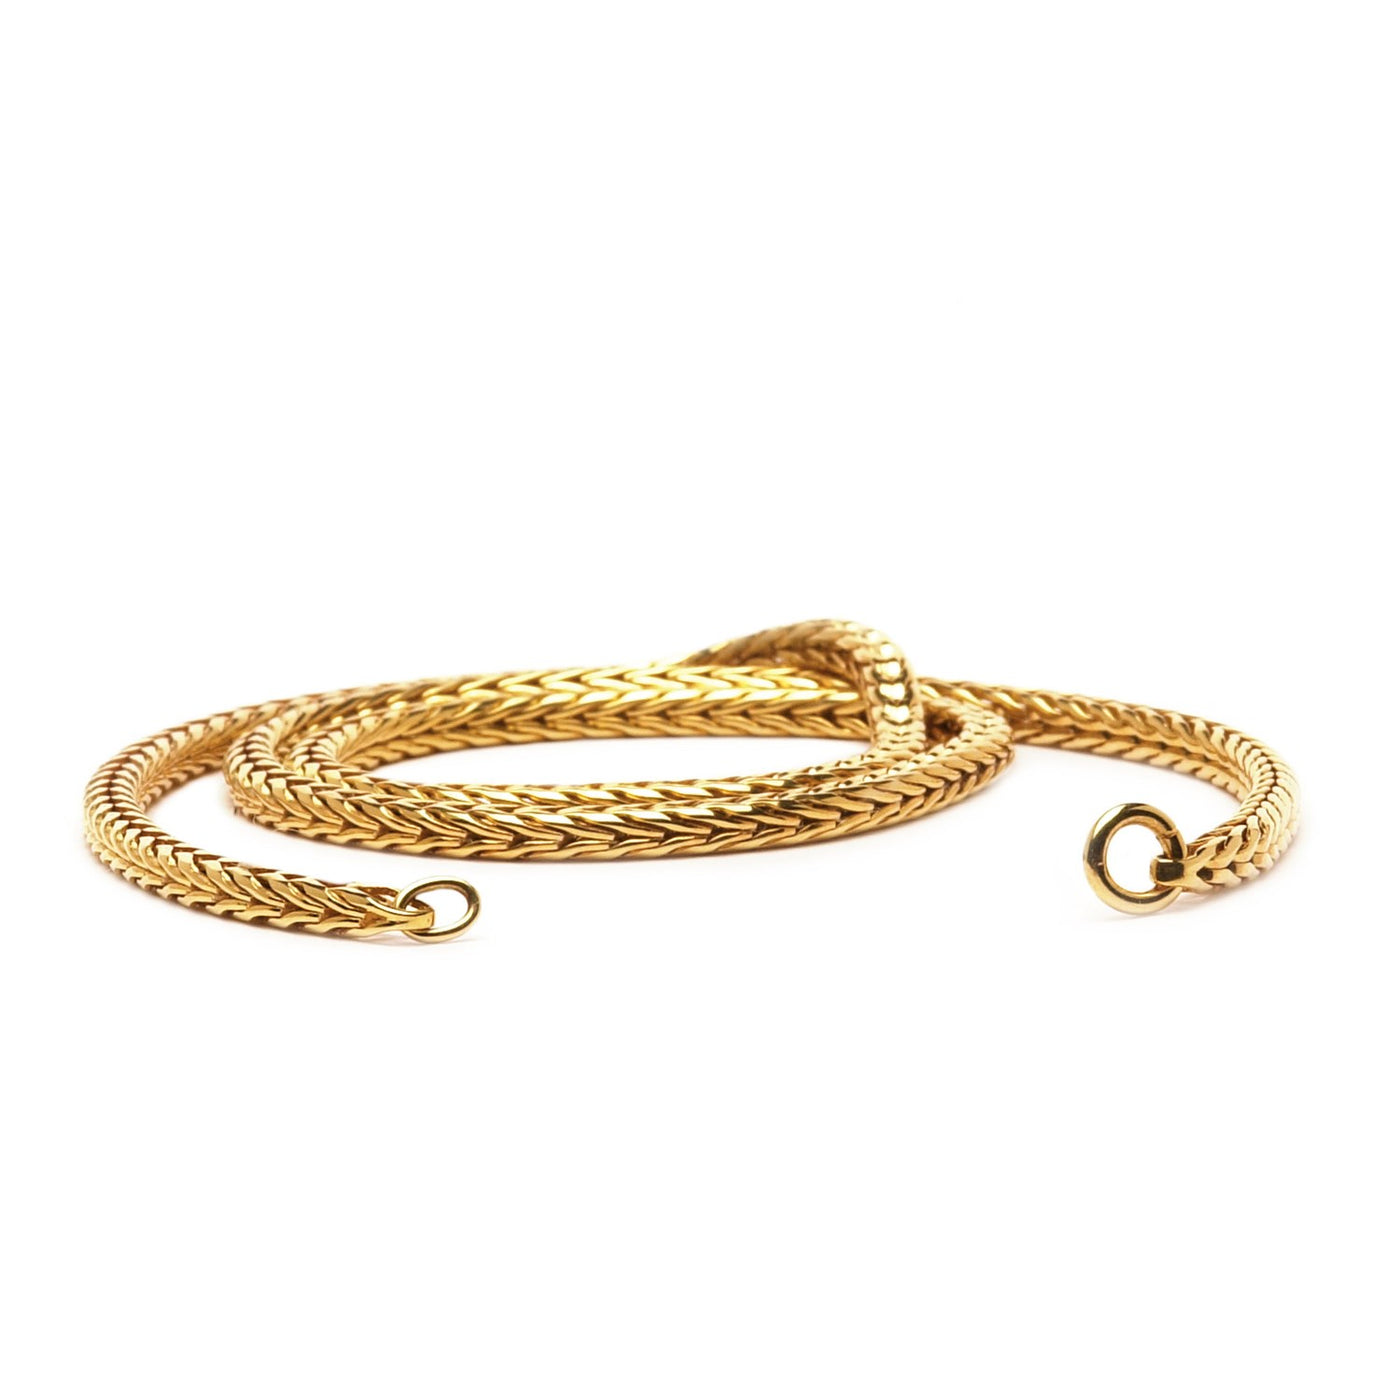 Gold 14 k Necklace with Basic Lock 